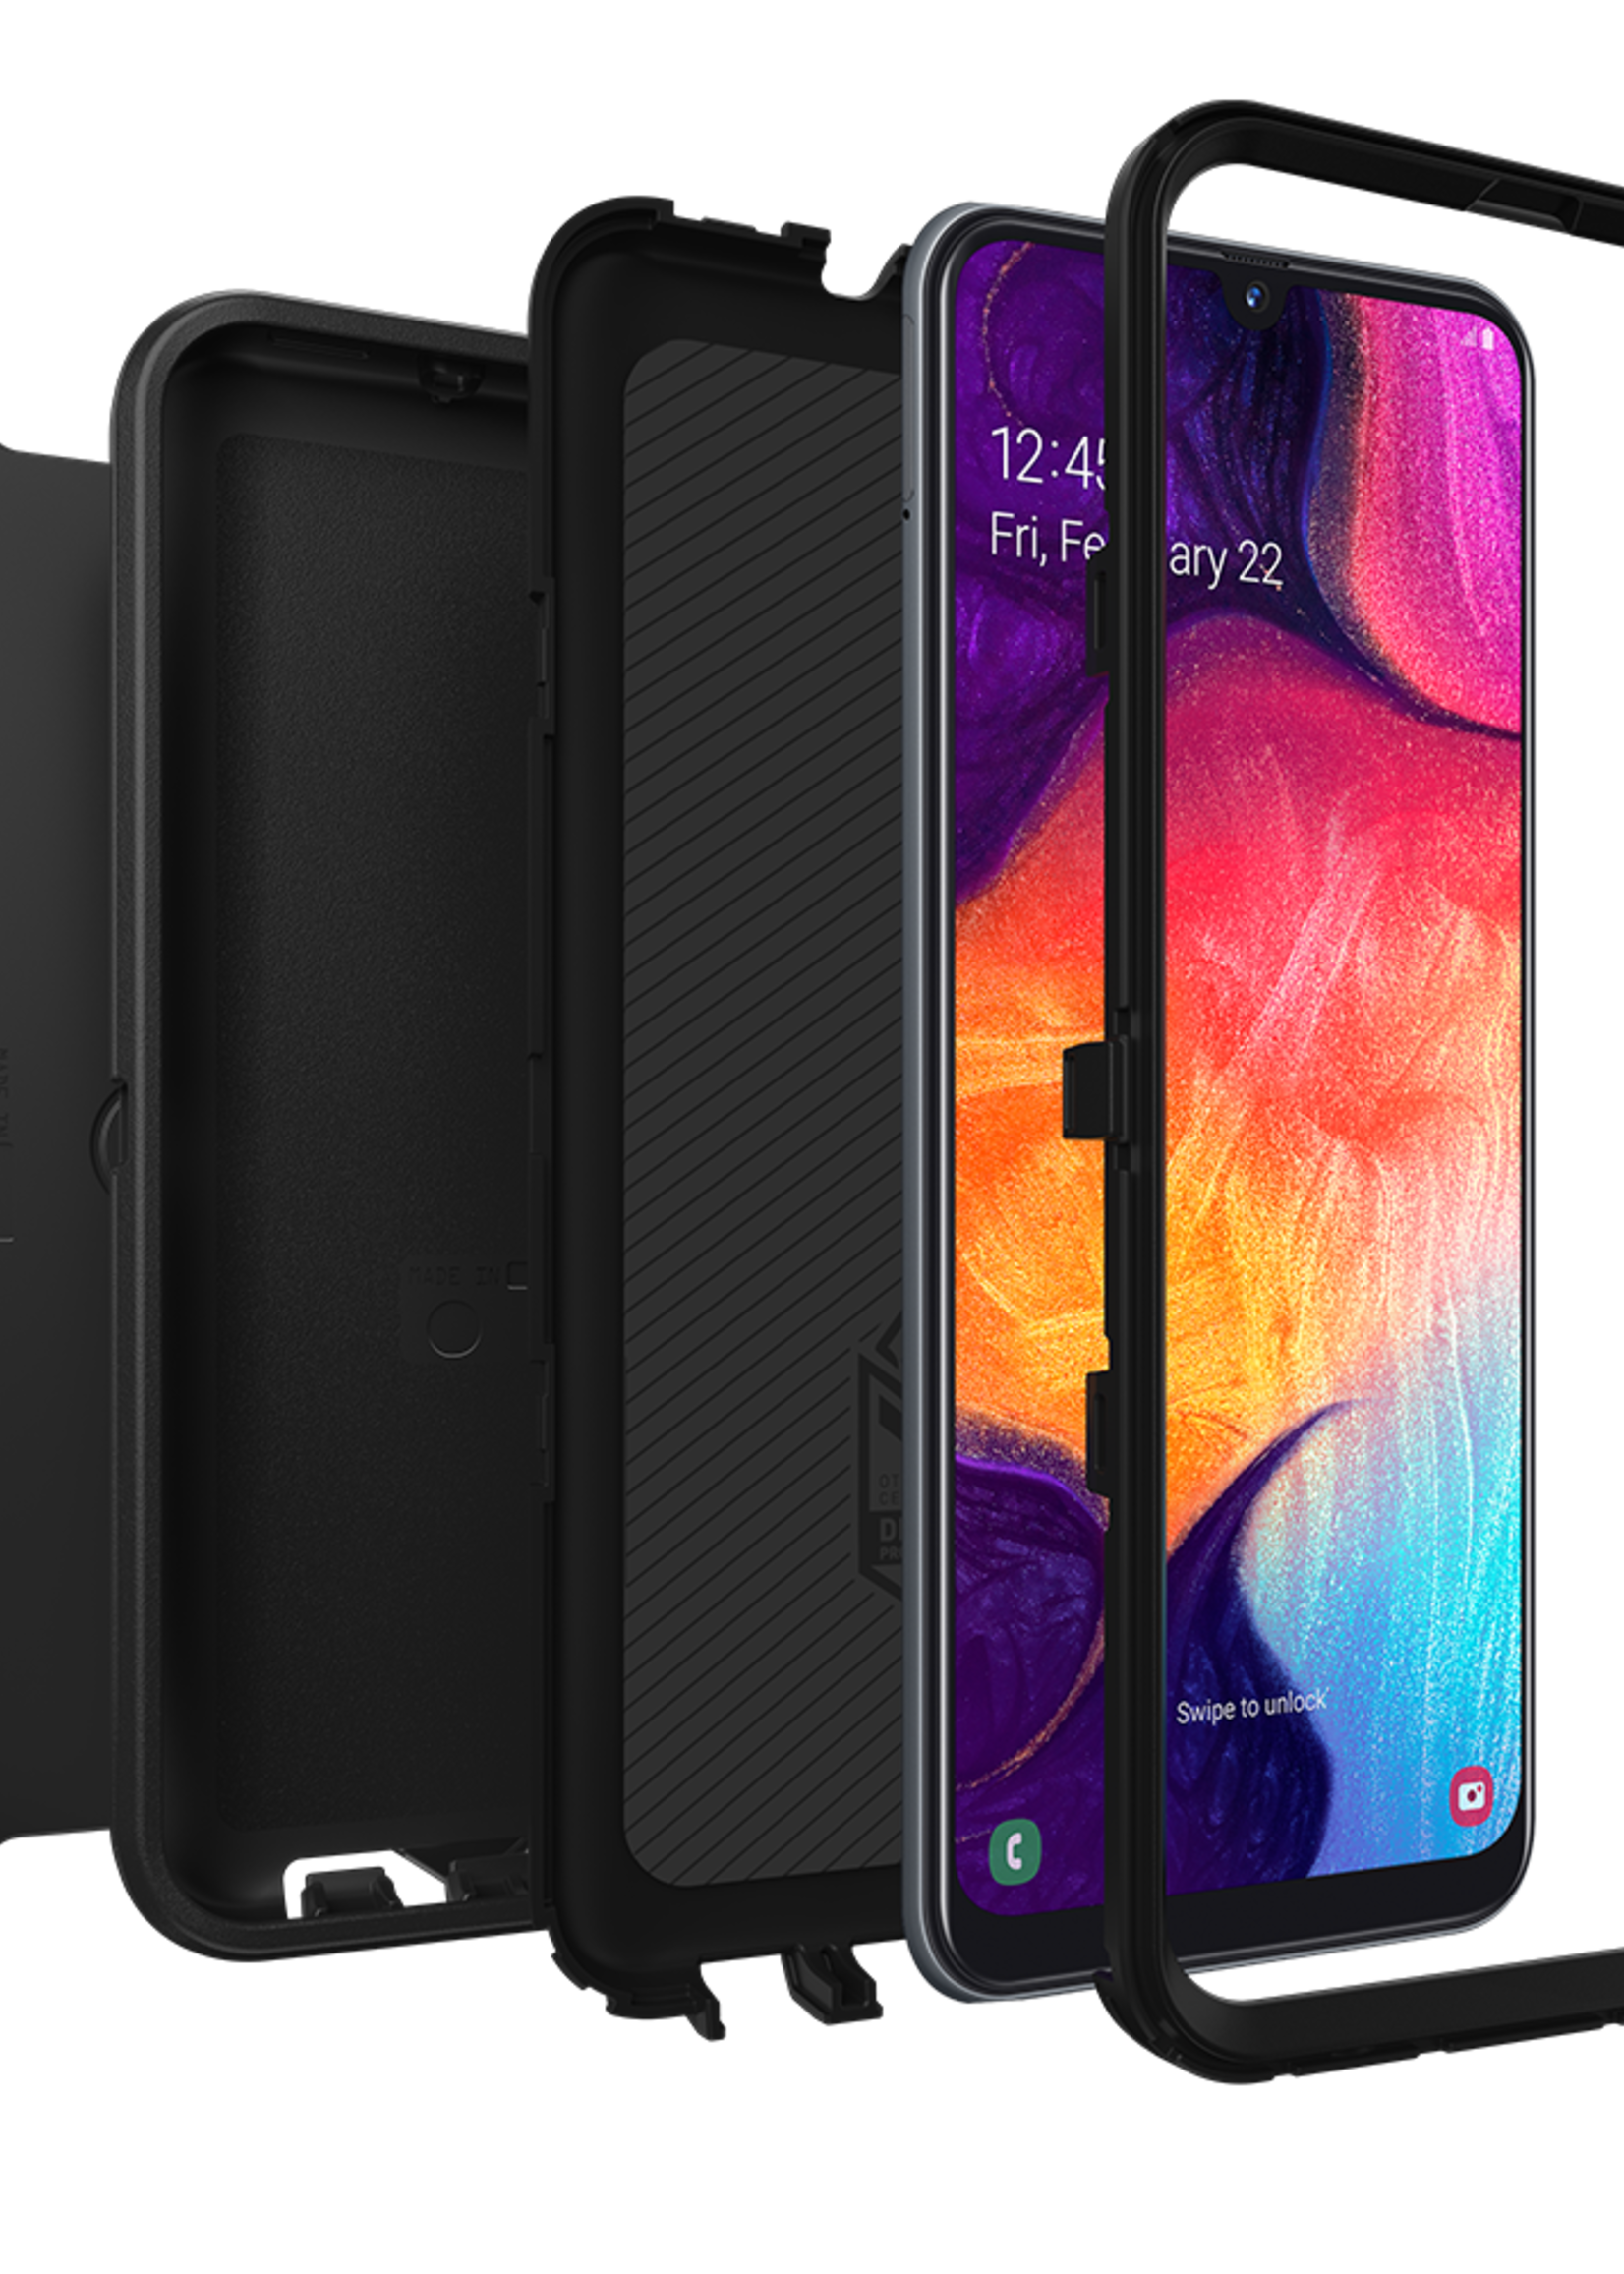 Otterbox OtterBox - Defender Case for Samsung Galaxy A50 - Black